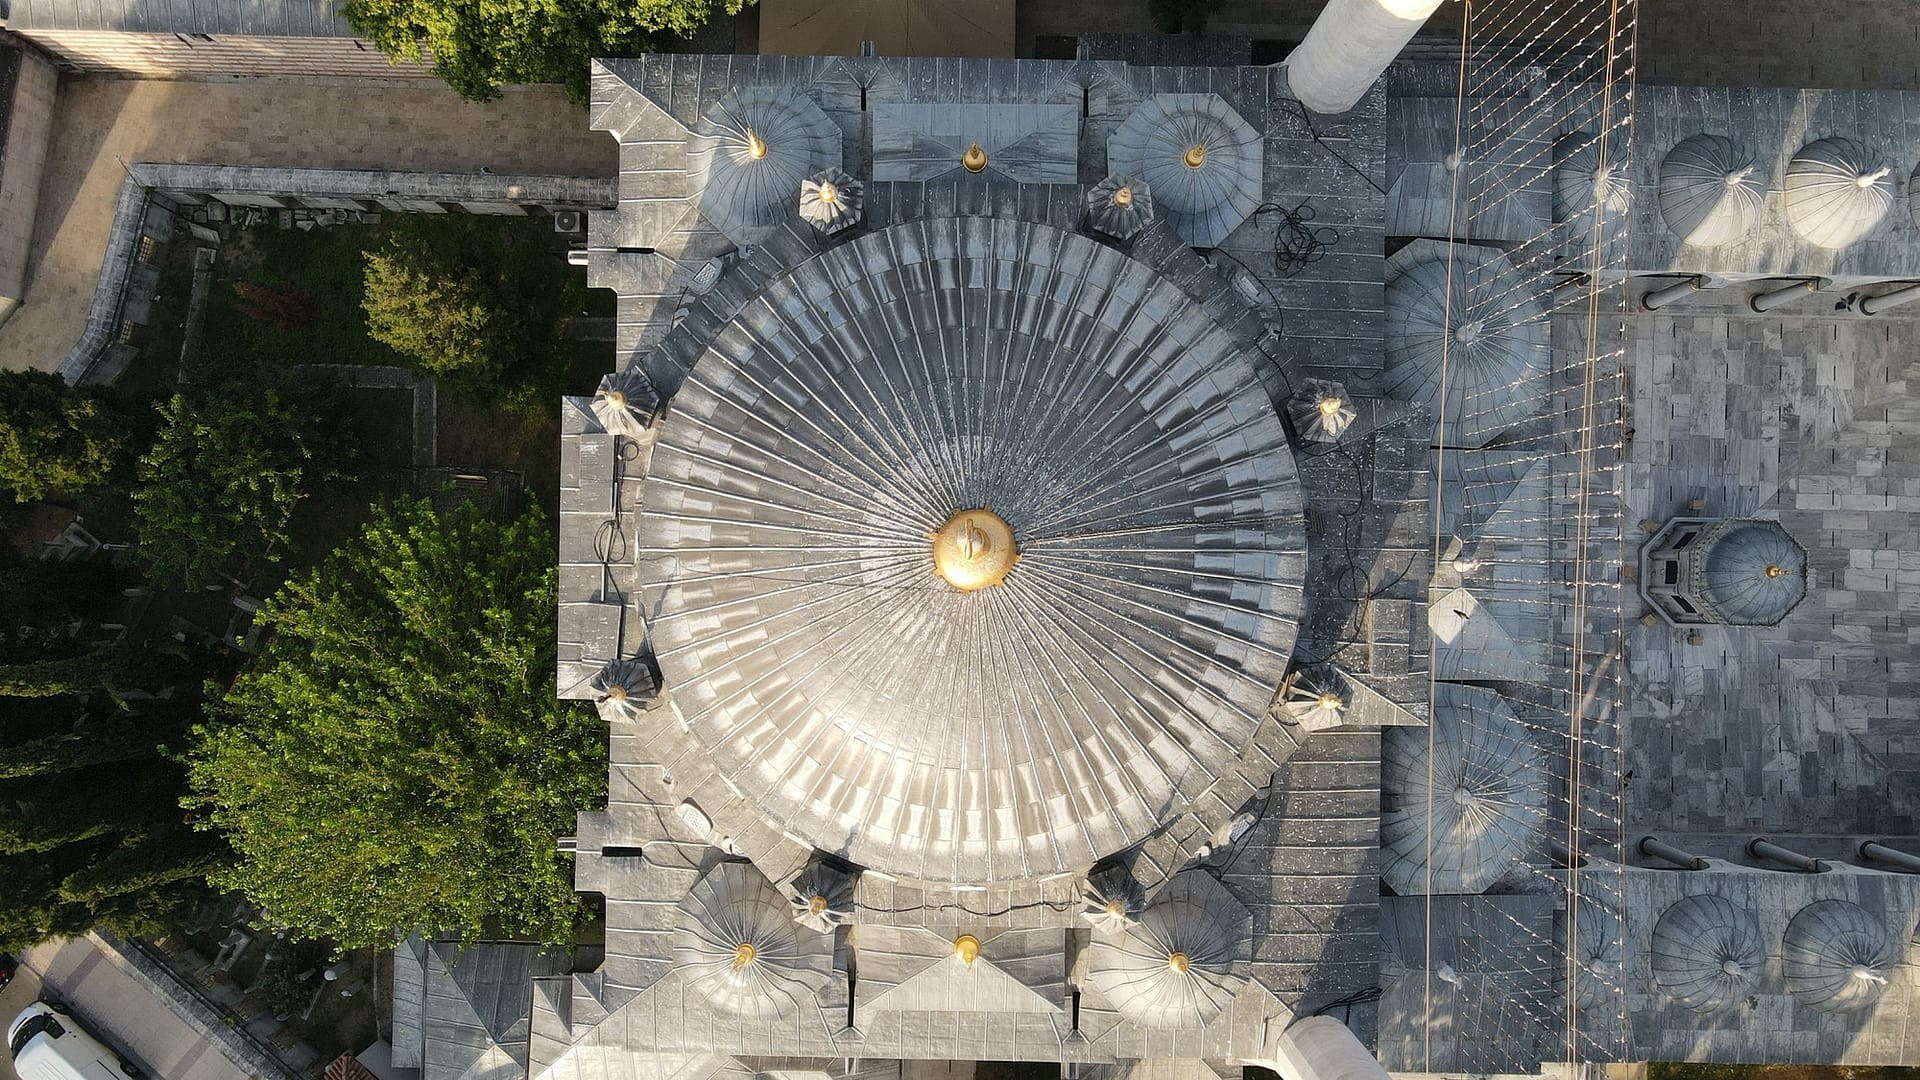 Aerial shot of an Islamic mosque in Instanbul, Turkey